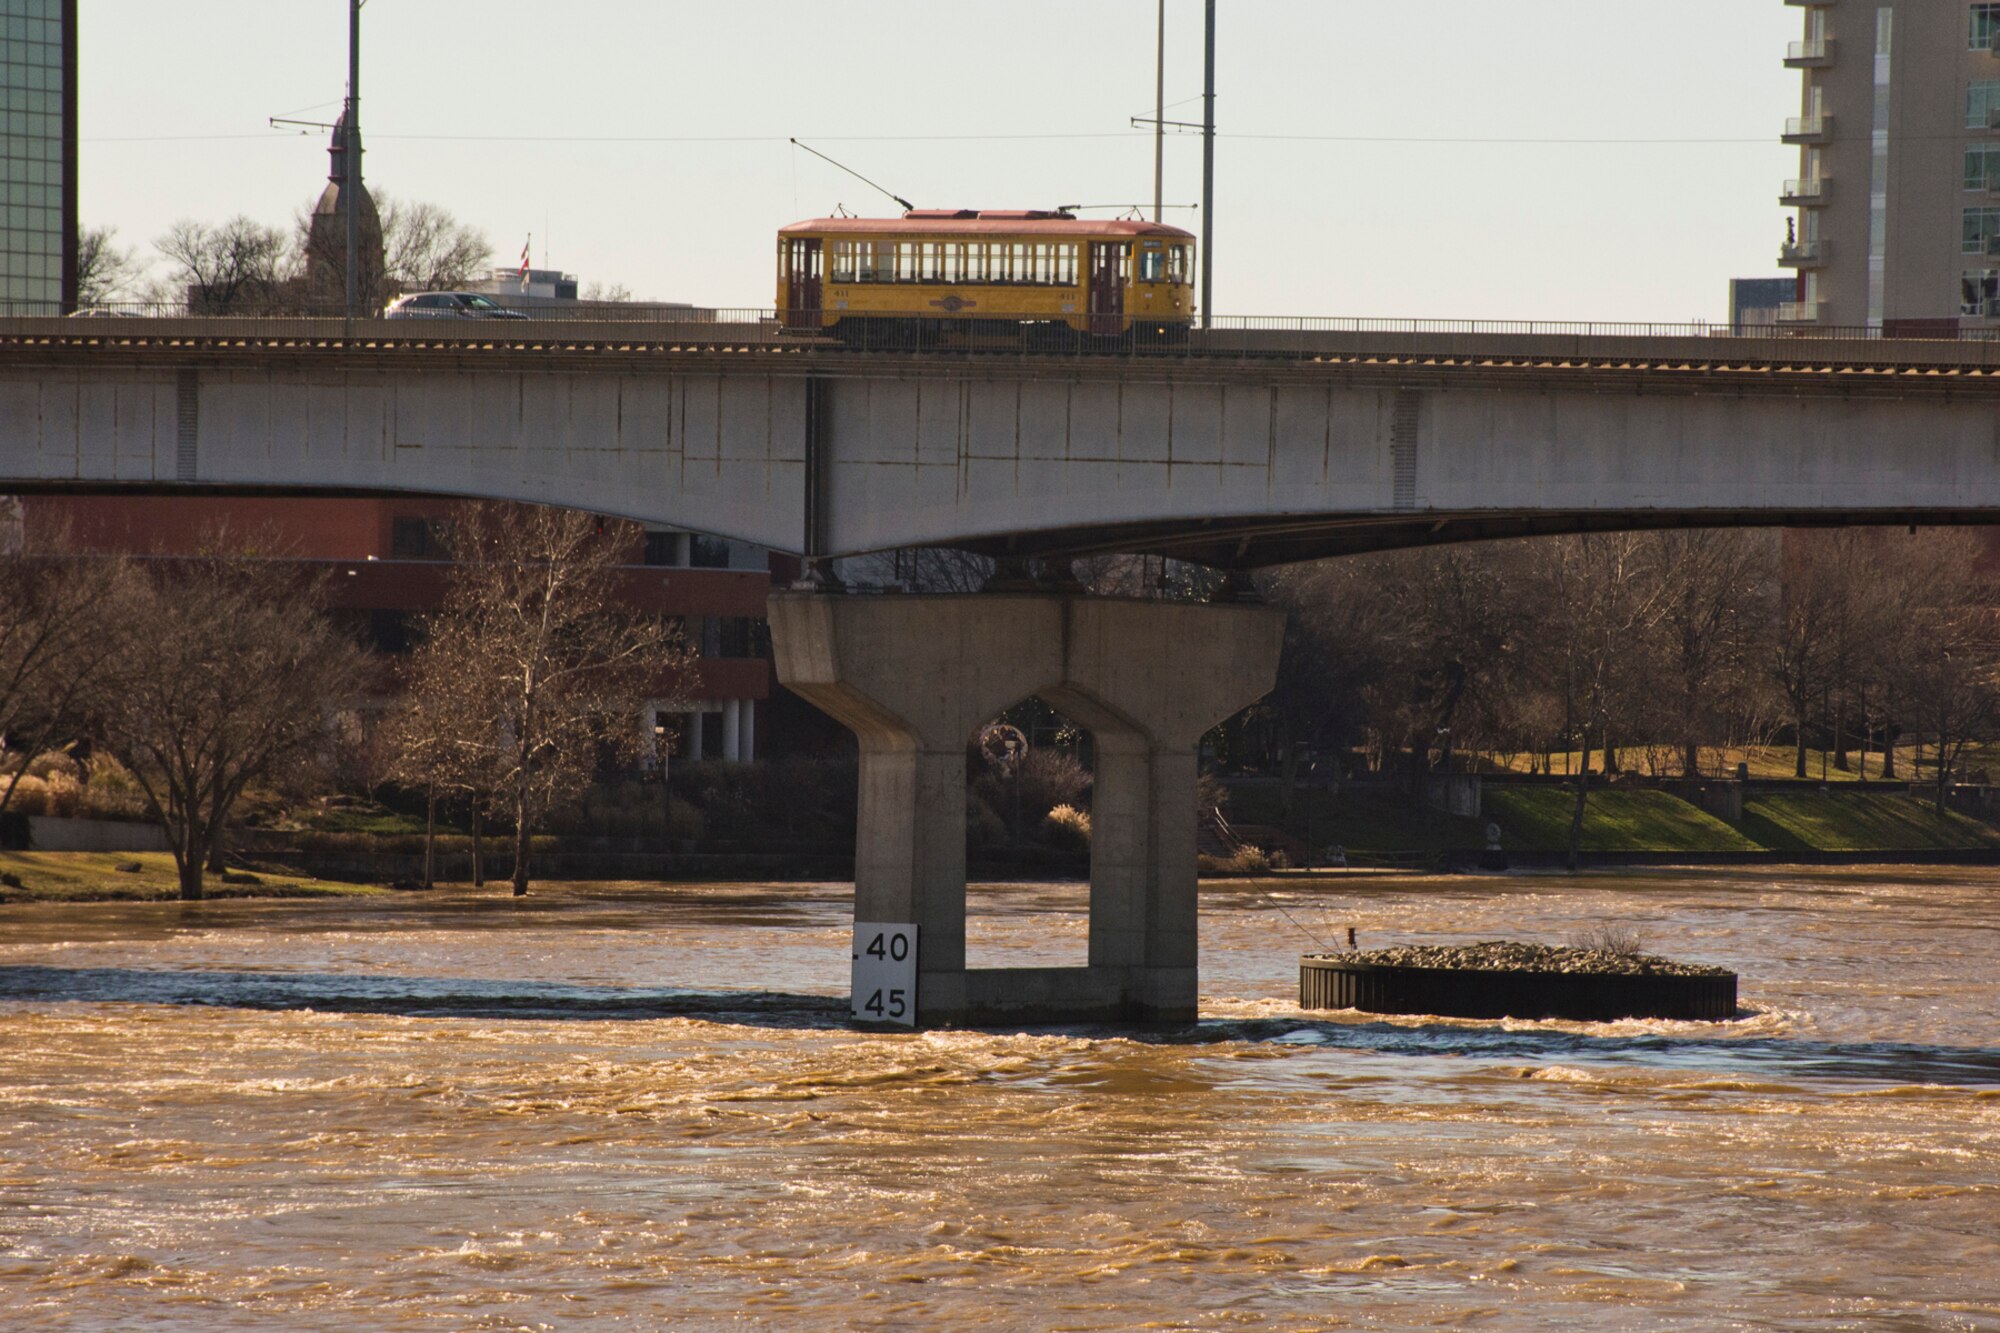 A River Rail Electric Streetcar crosses over the Arkansas River on the Main Street Bridge from Little Rock to North Little Rock Ark., Jan. 3, 2016. Recent flooding in Arkansas could set records, and everyone is encouraged to stay off the rivers, which include the Arkansas, Buffalo and White rivers until further notice. (Courtesy photo by Jeff Walston) 